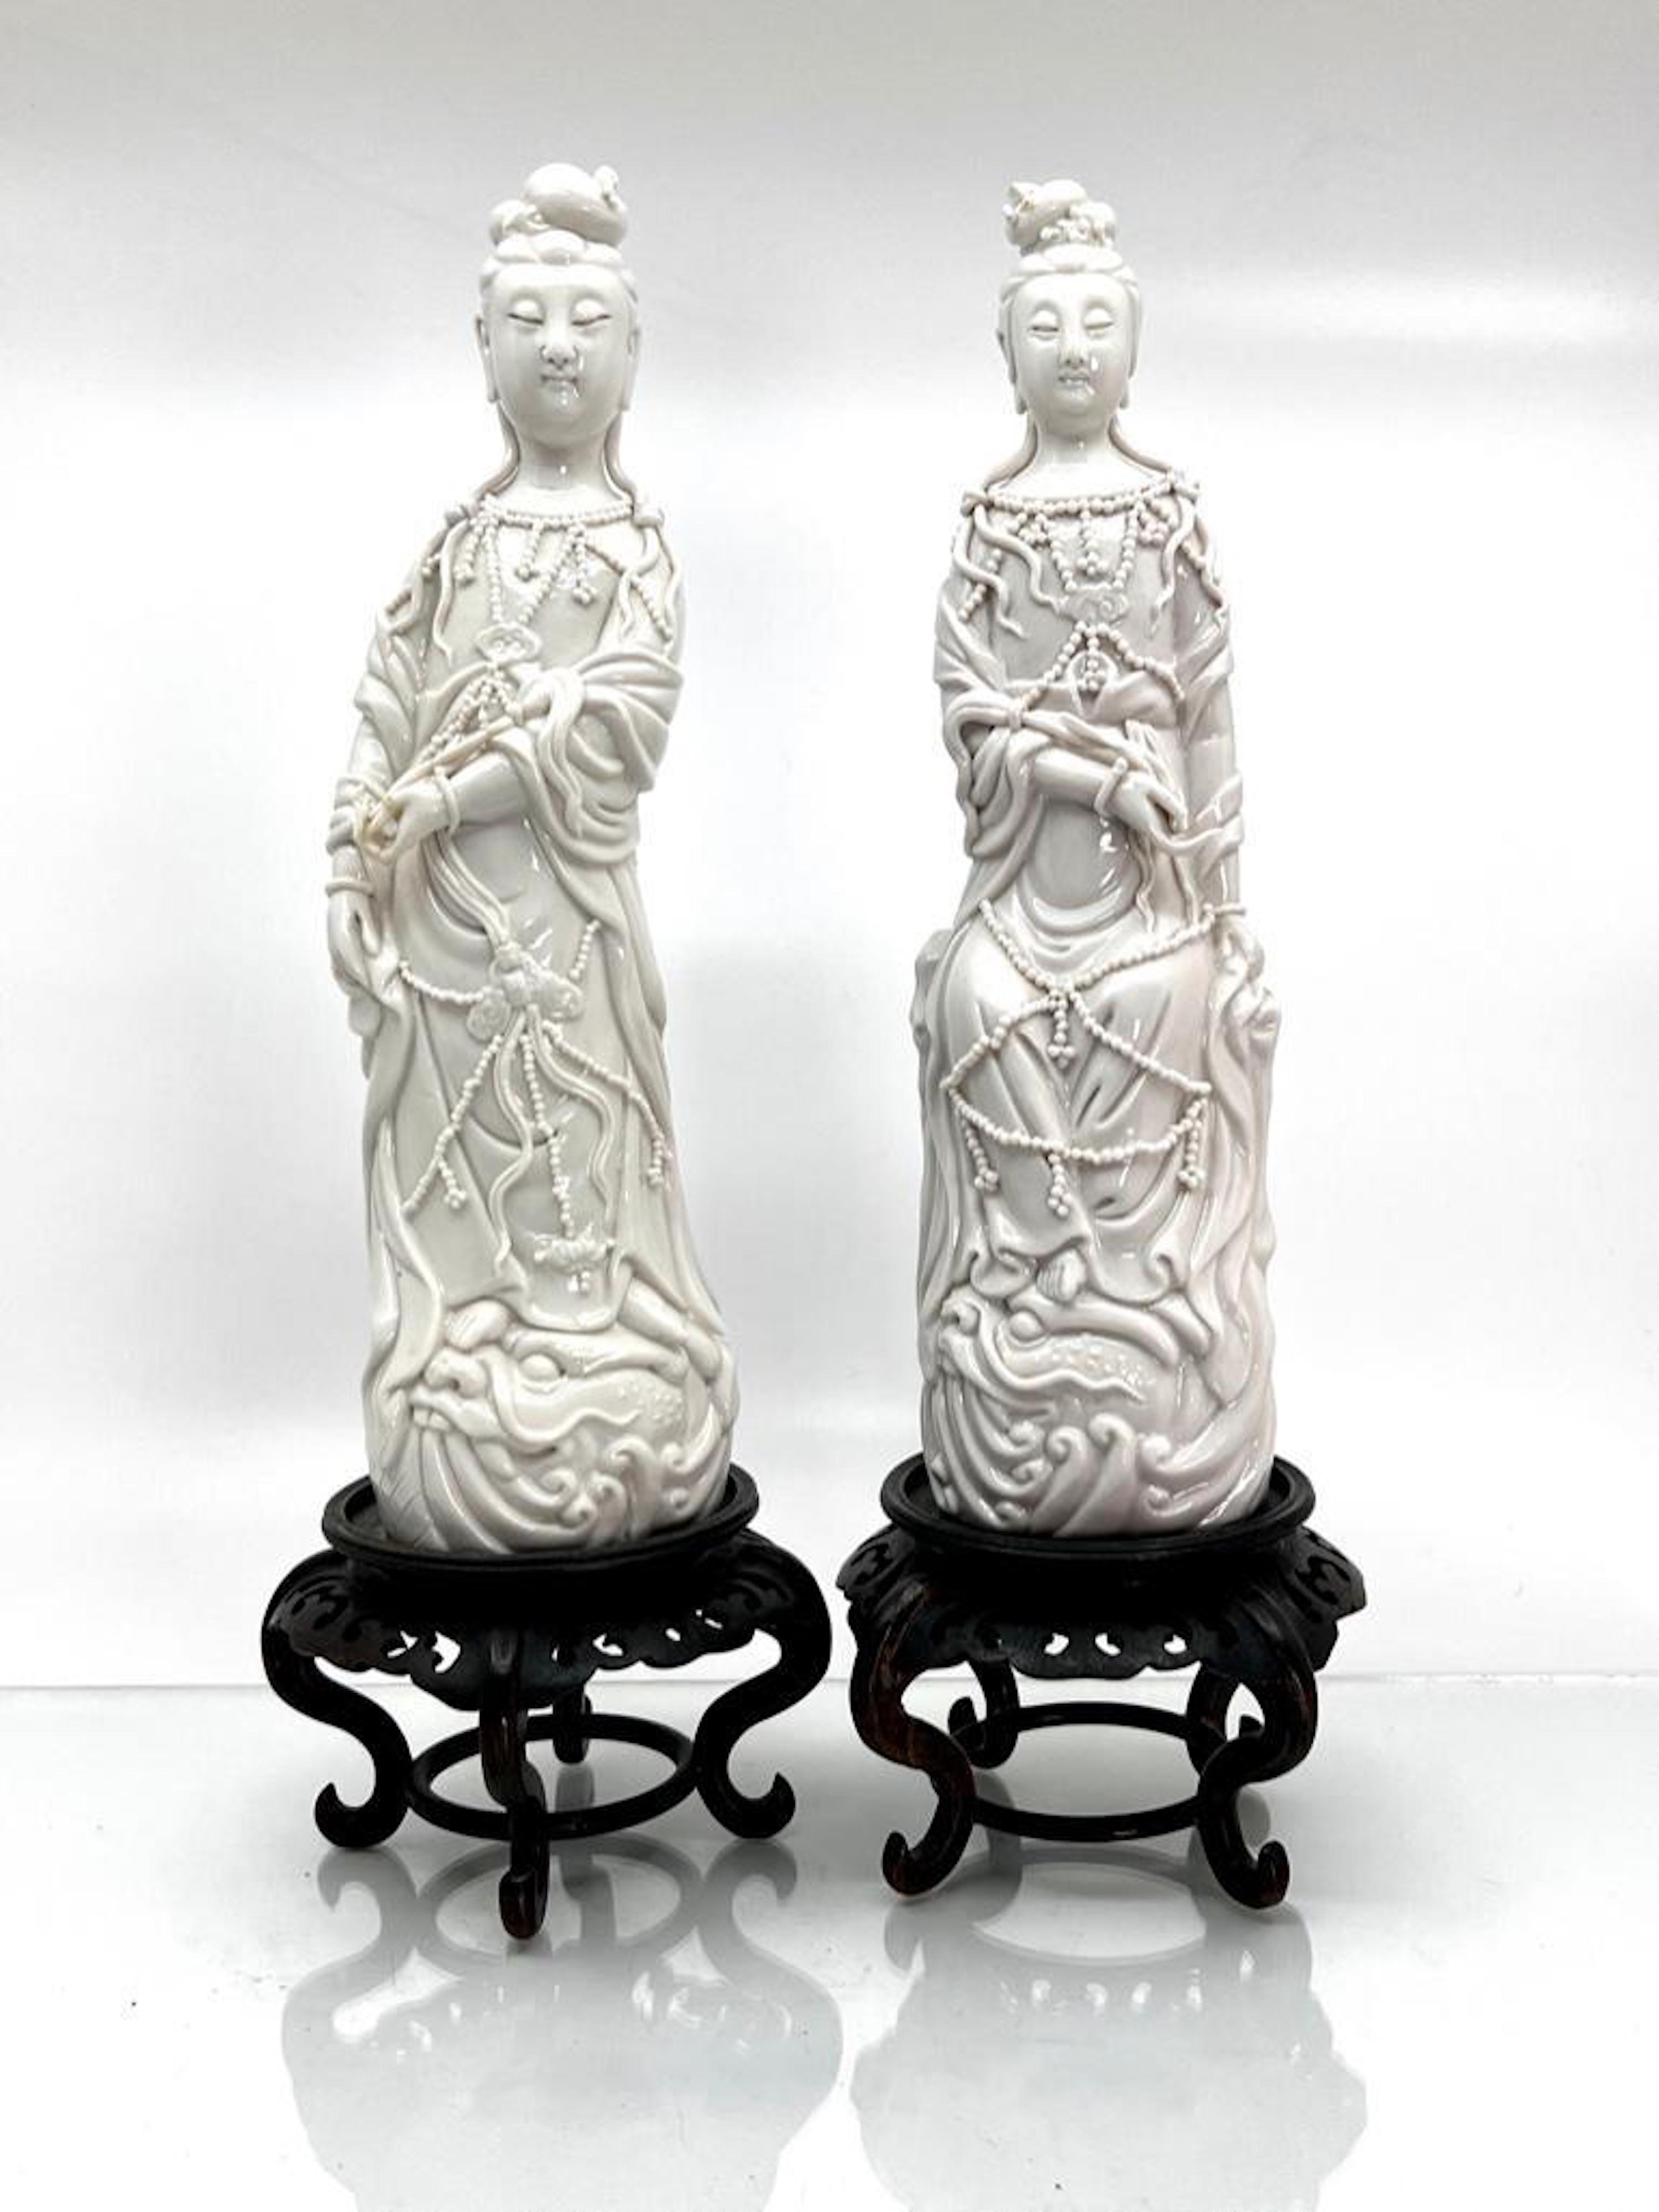 Pair of blanc de chine porcelain Guanyin with stand, est. $100-$200